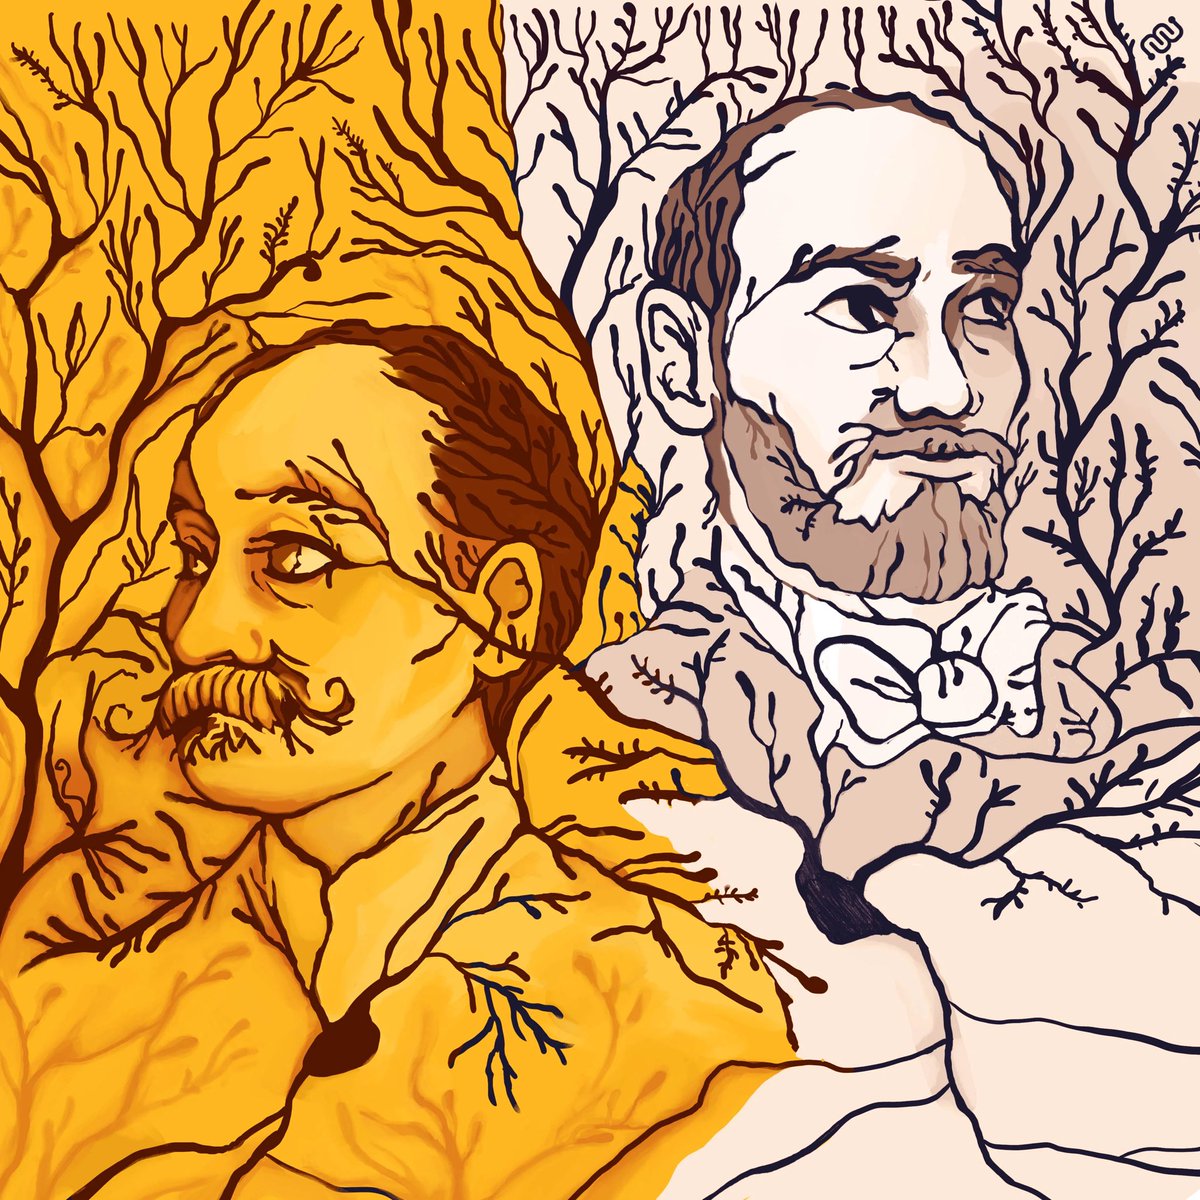 In 1906,  #Cajal and  #Golgi shared the  #NobelPrize for his contribution to the understanding of the structural organization of the  #brain, what was called the Neural Doctrine. It was one of the fists jointly awarded prizes in physiology and medicine.